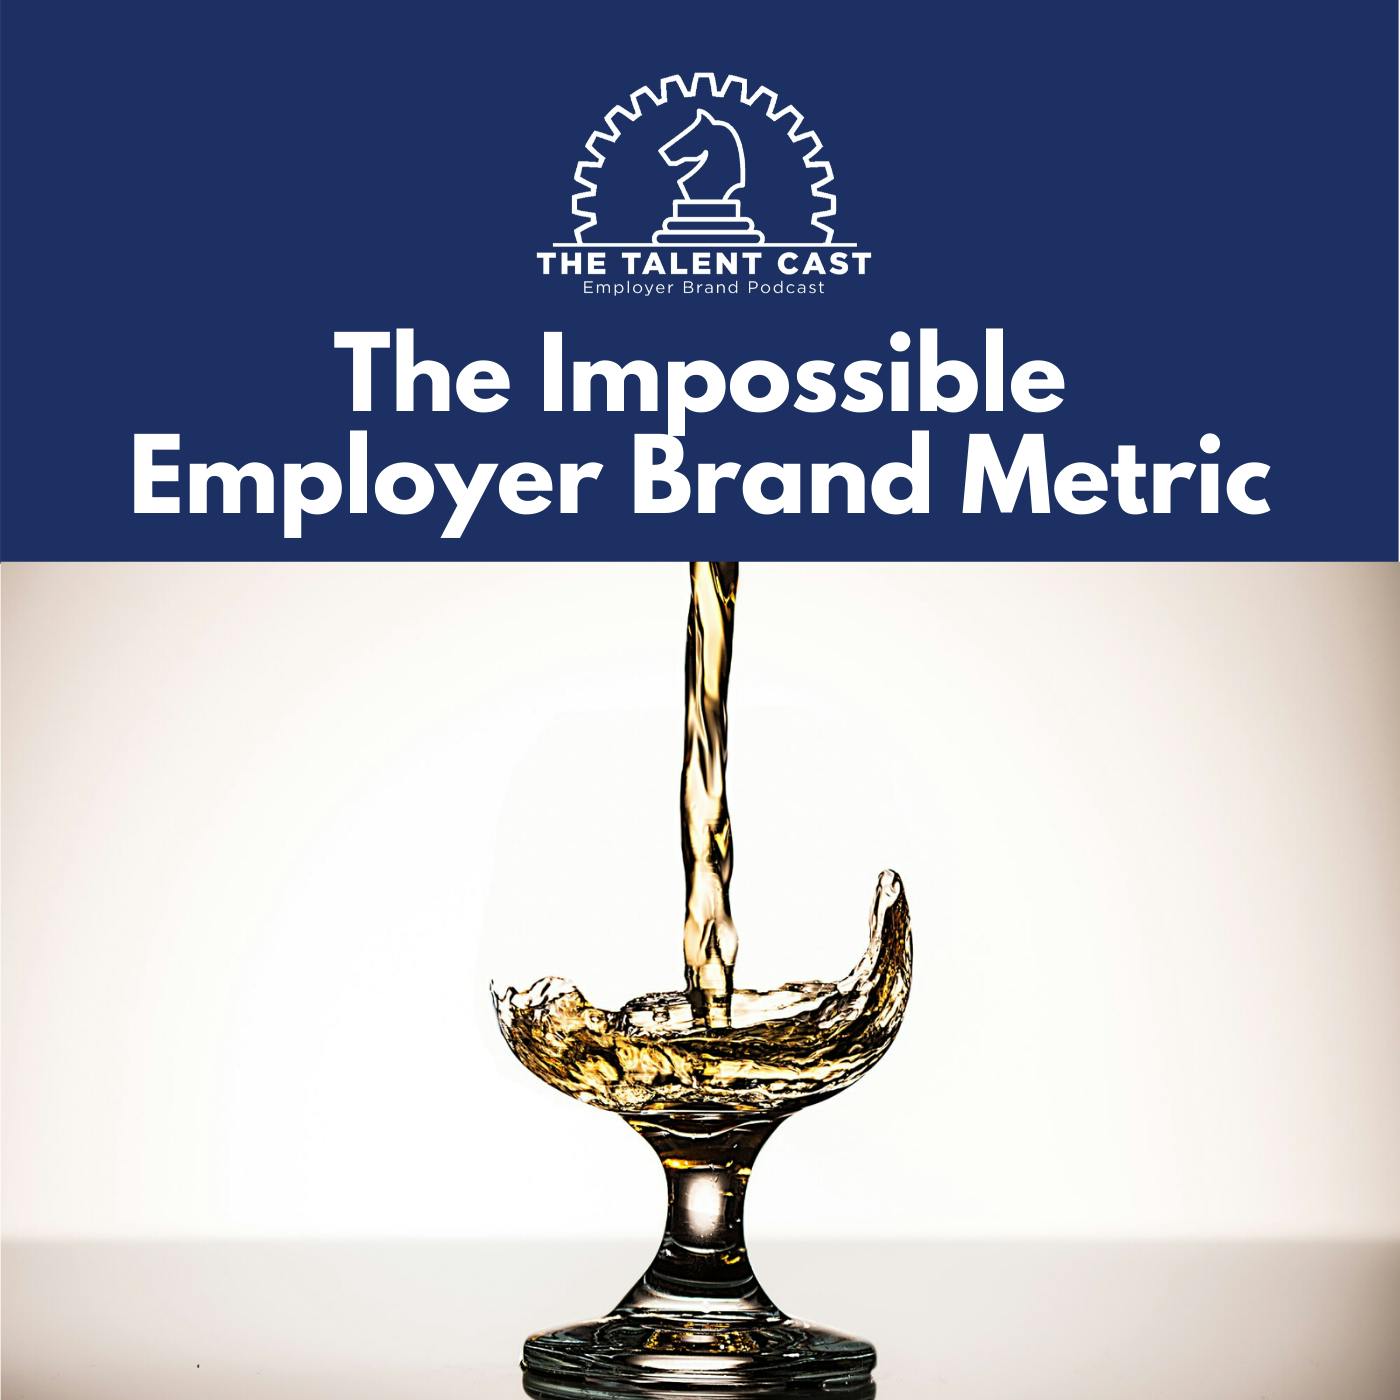 The Impossible Employer Brand Metric